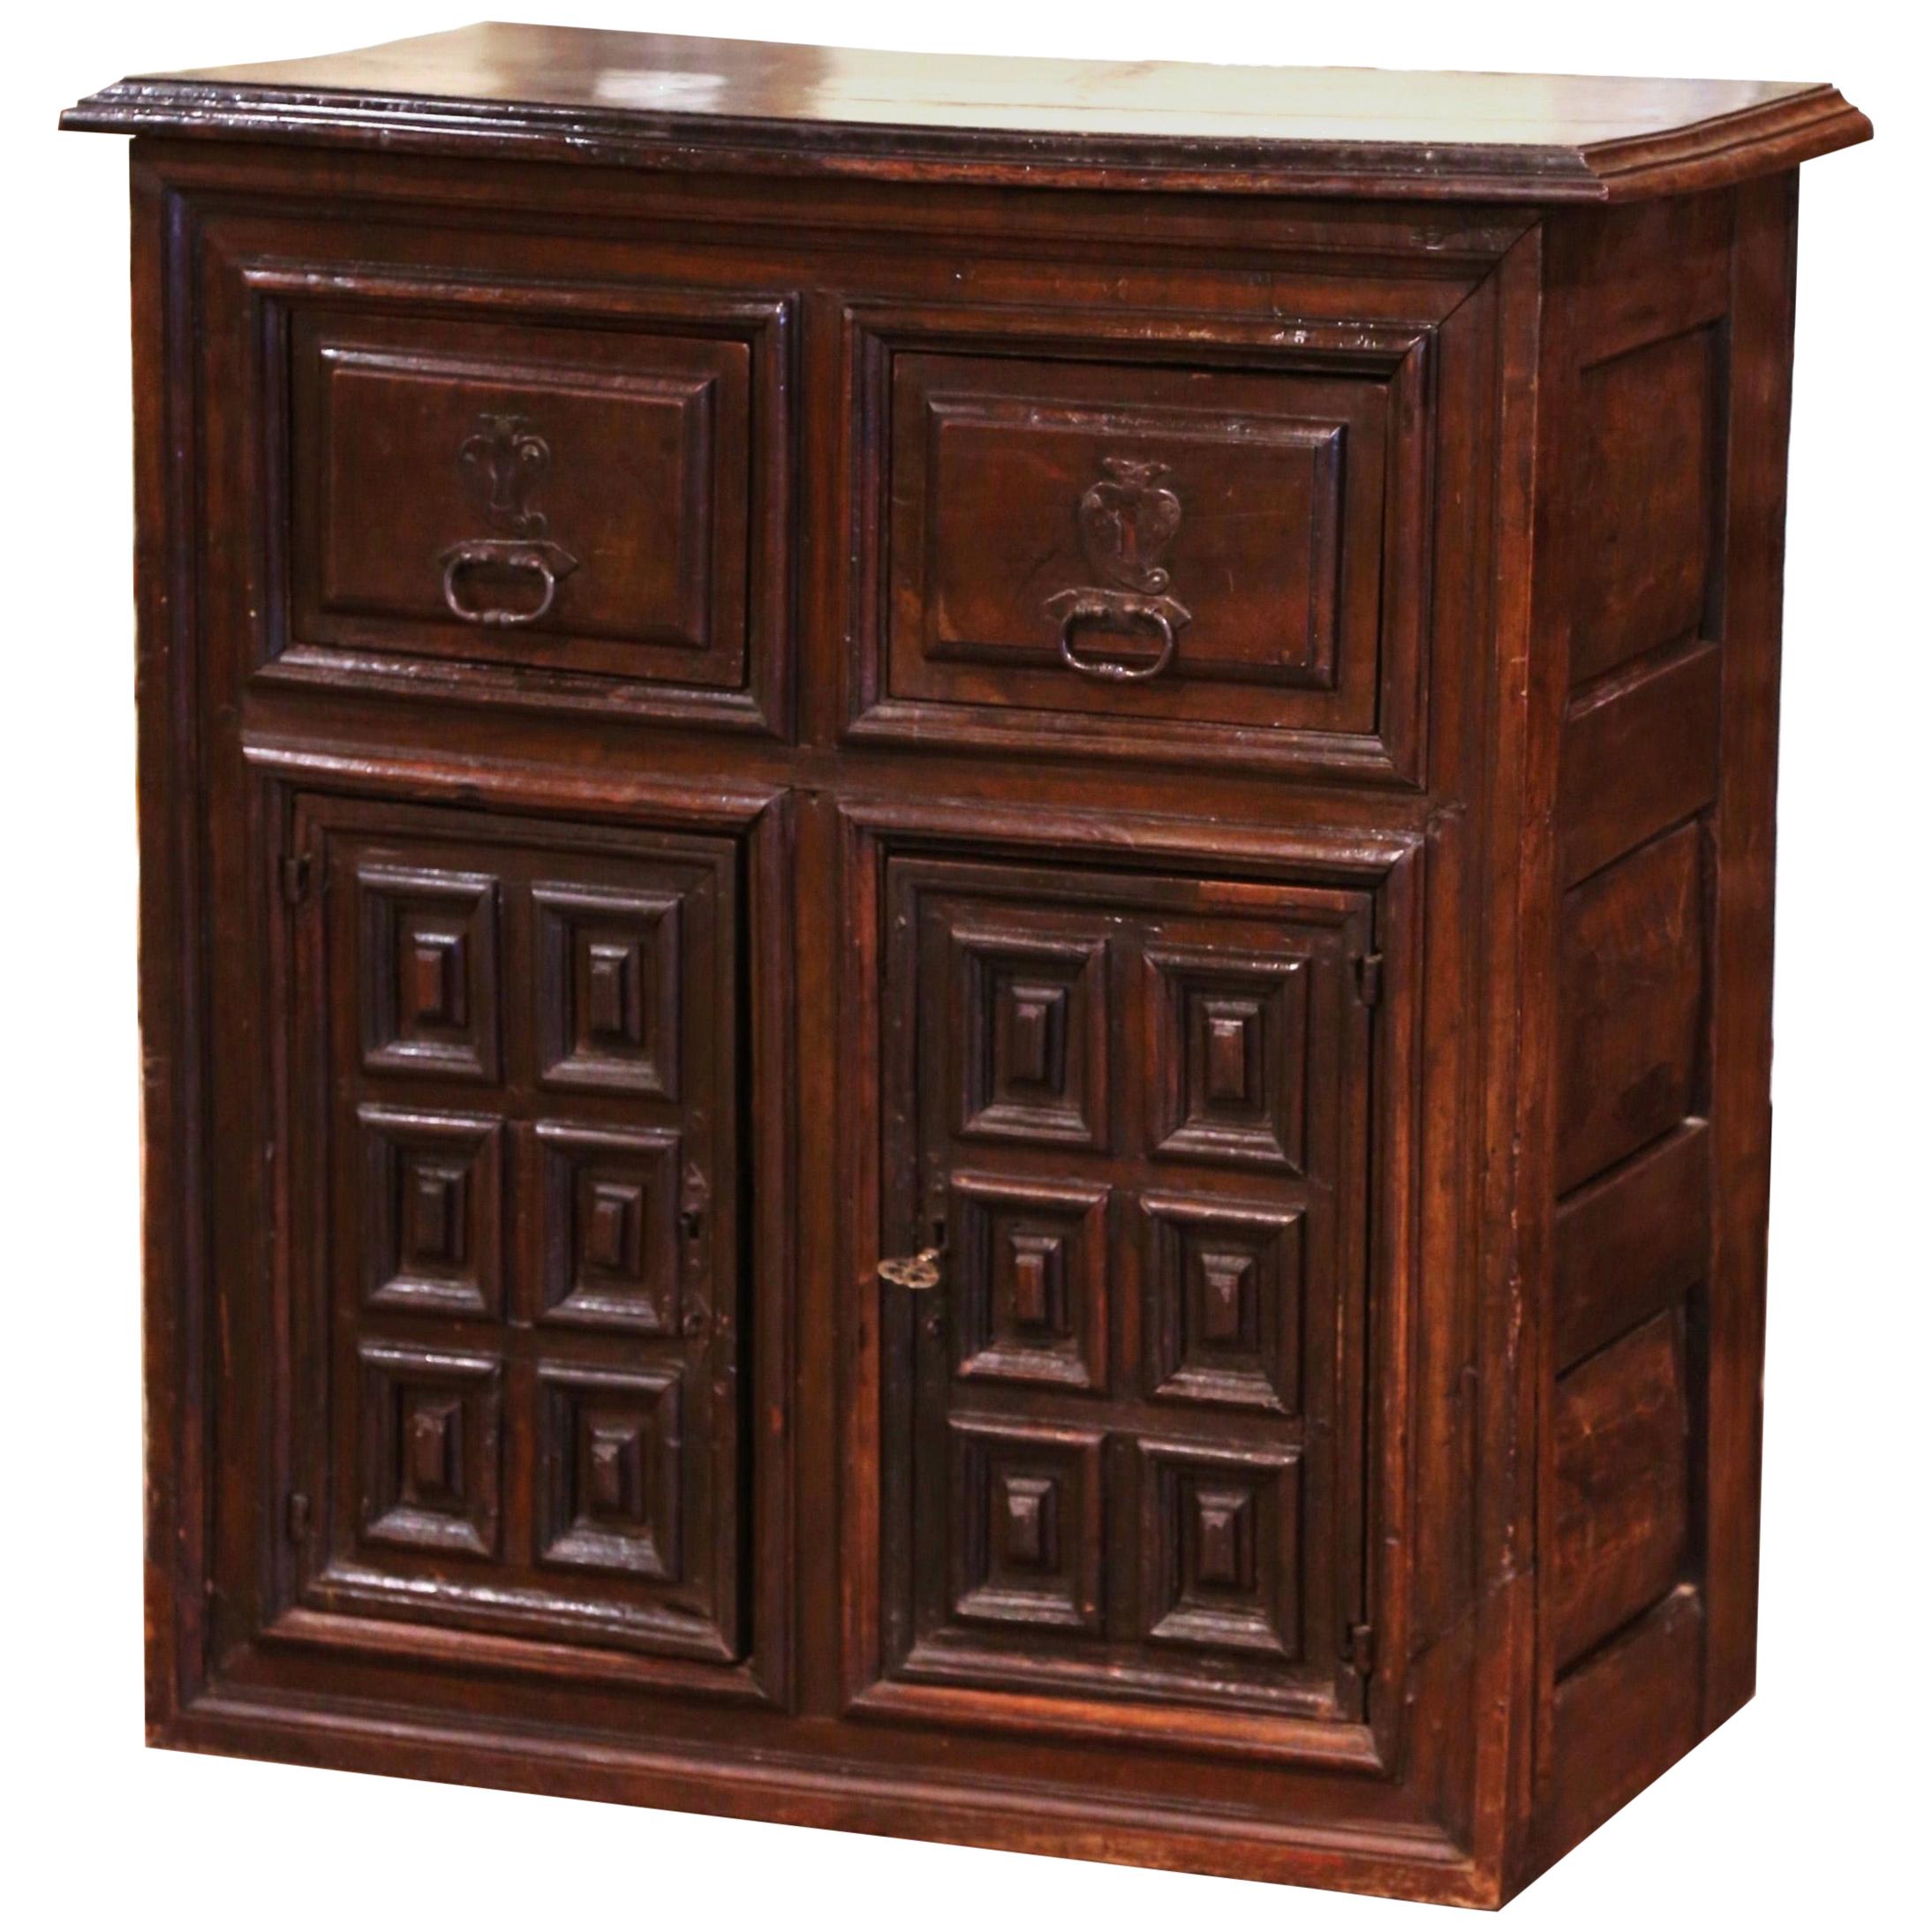 17th Century Spanish Catalan Carved Walnut Two-Door Buffet Cabinet